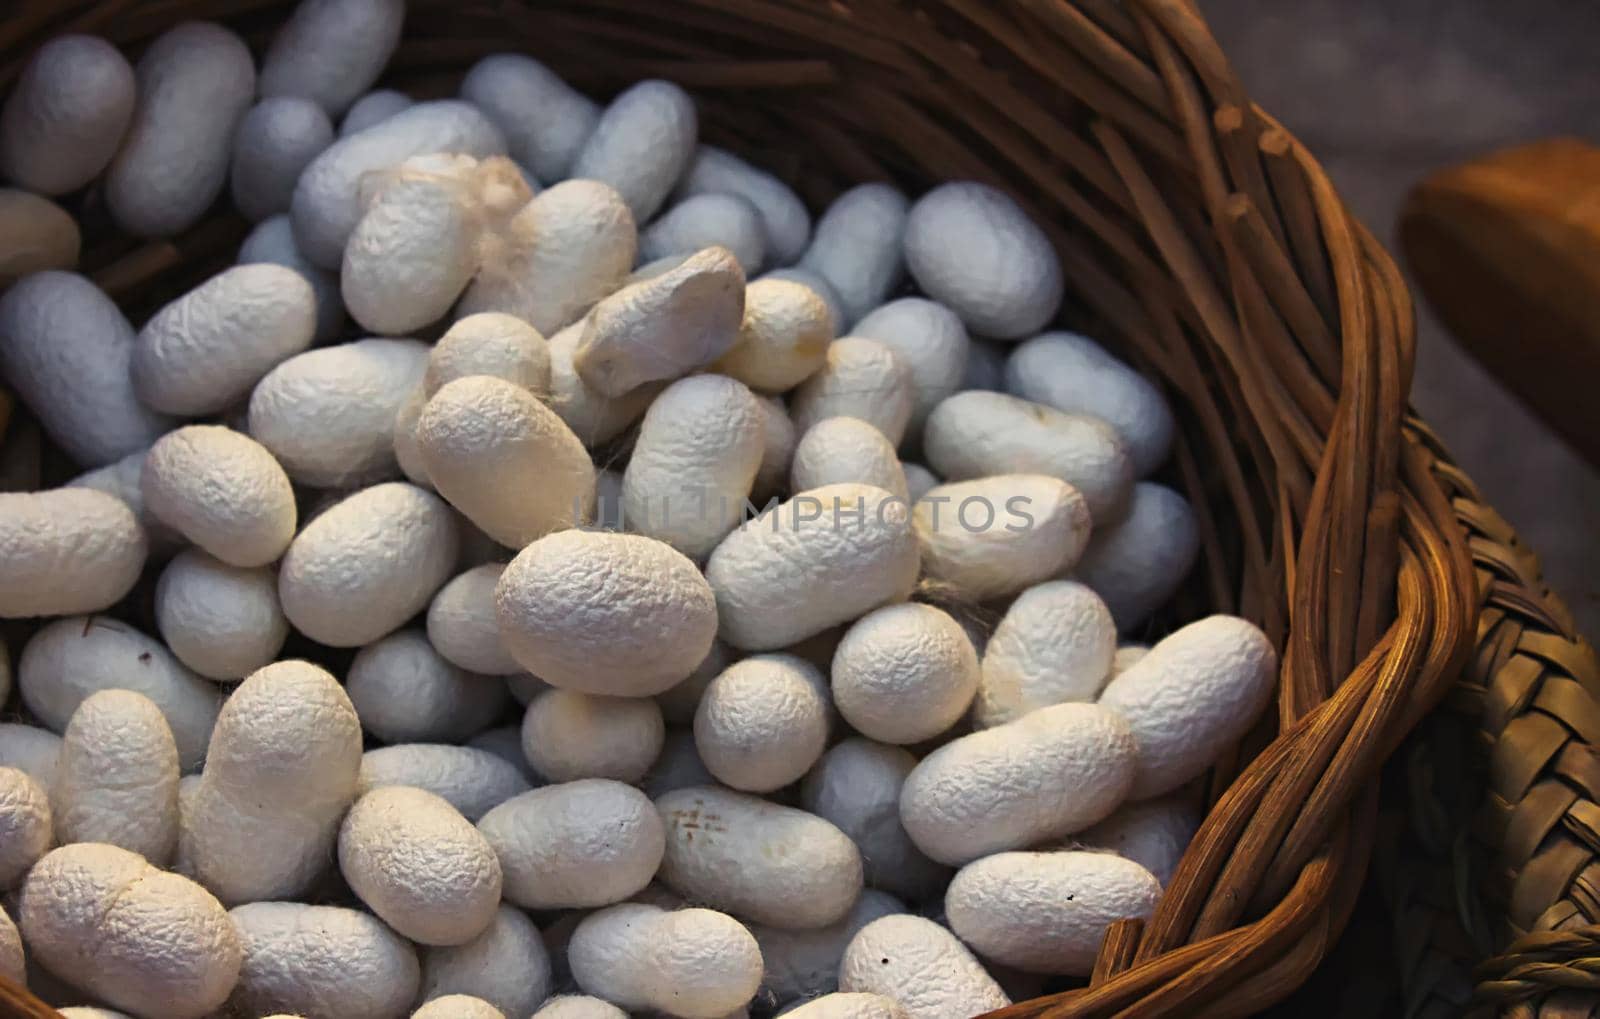 White silkworm cocoons in a hand woven wicker basket